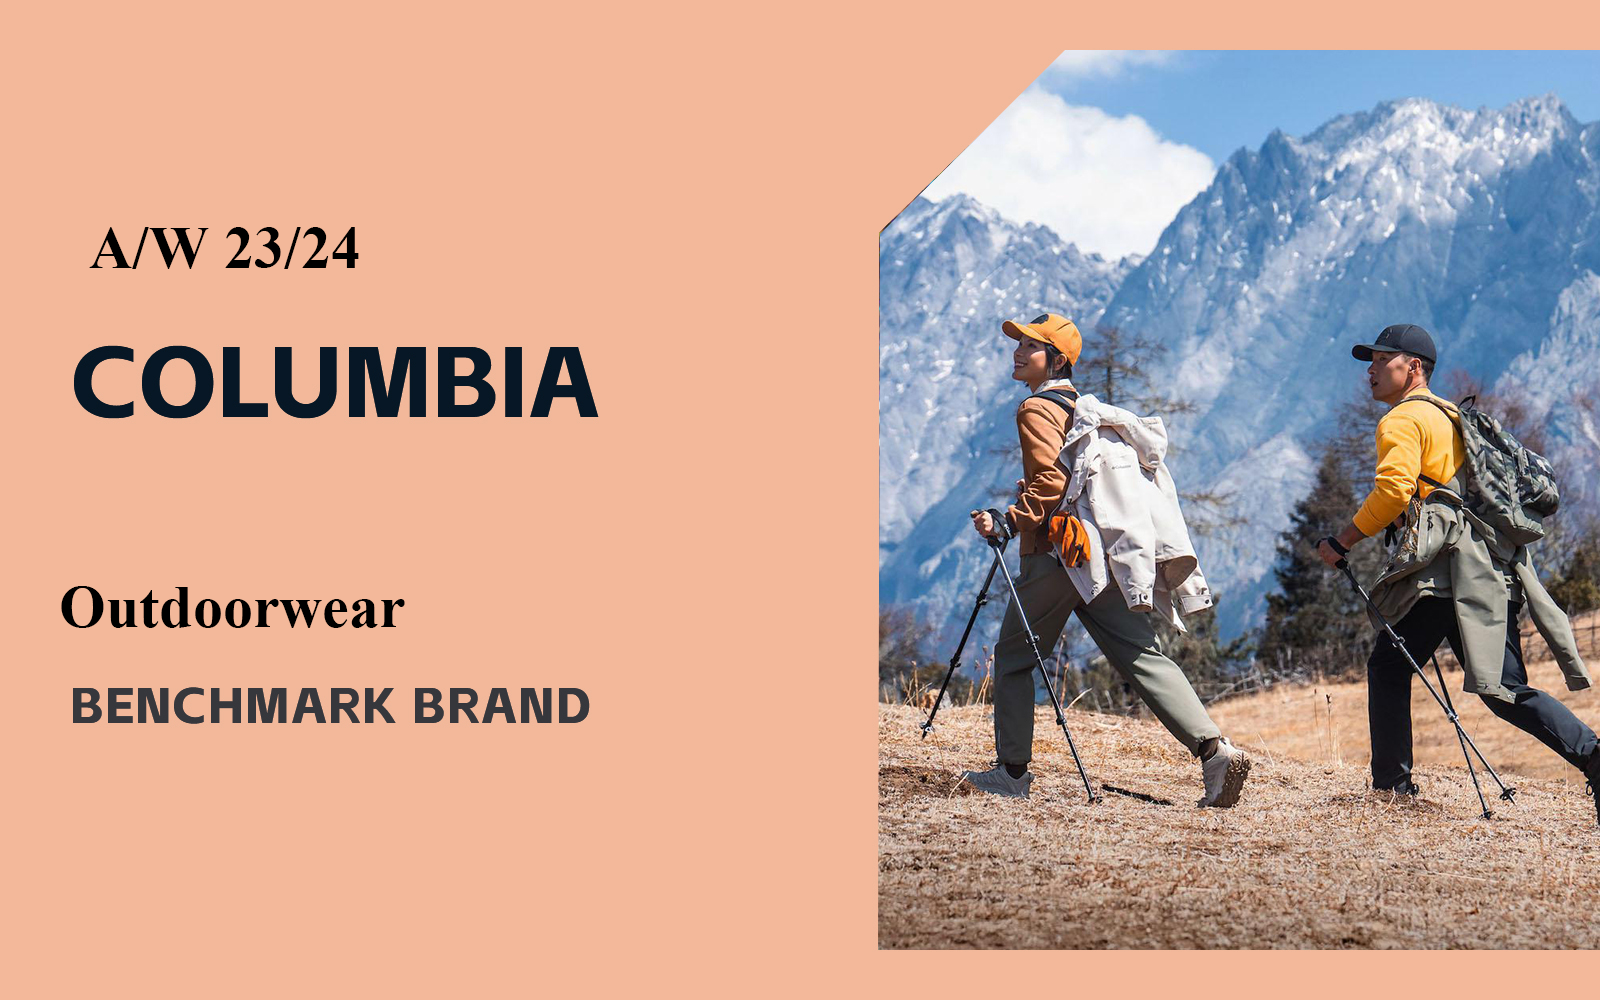 The Analysis of Columbia The Benchmark Outdoorwear Brand